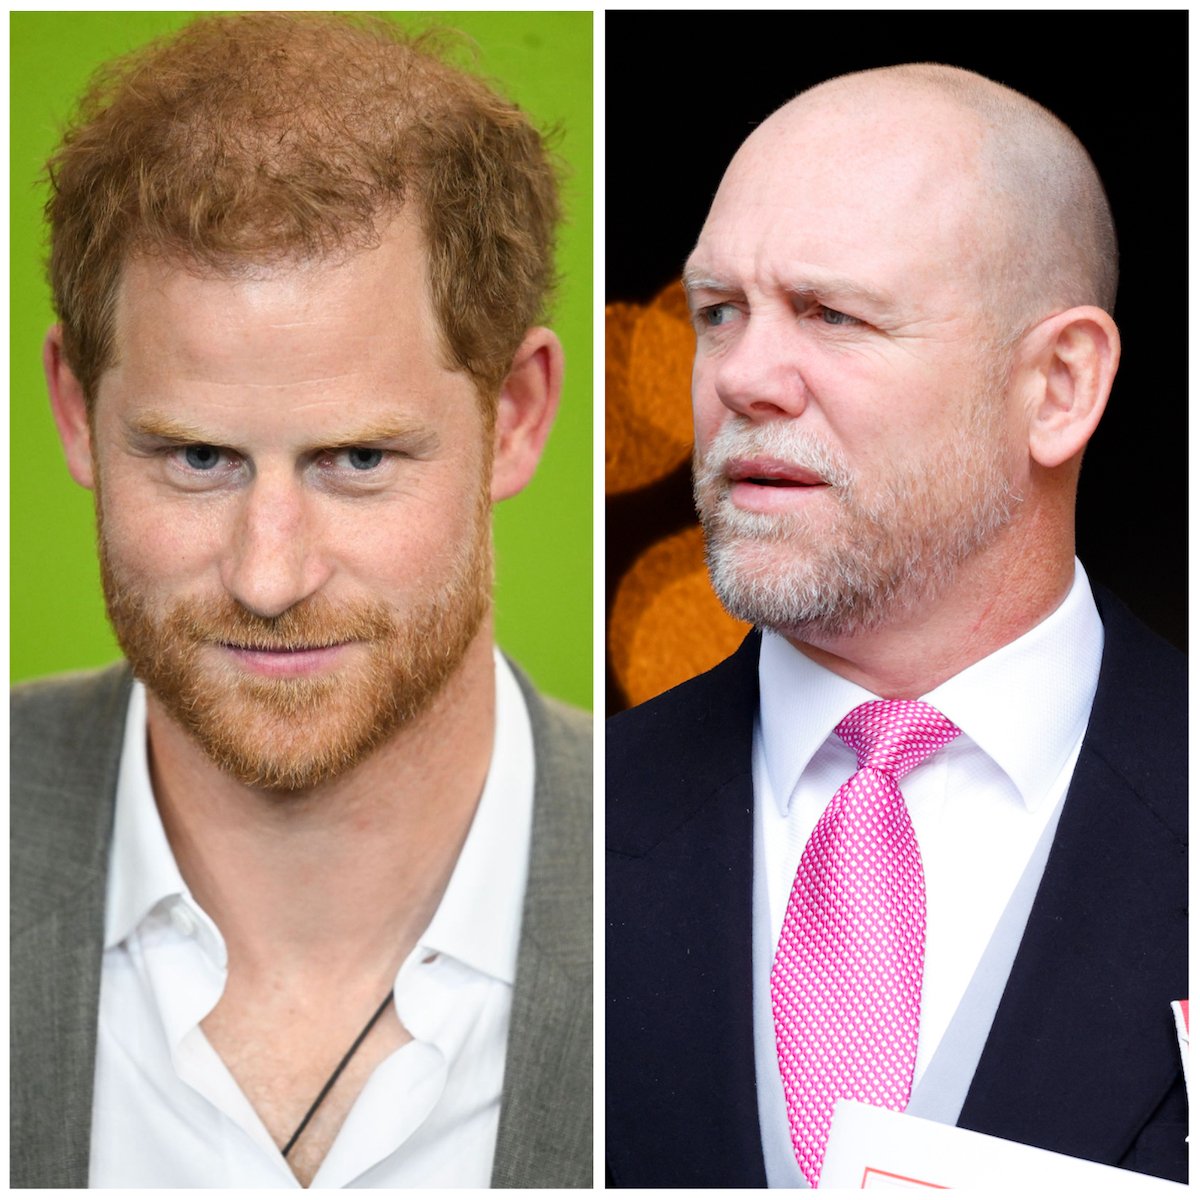 At another event in 2022, Prince Harry and Mike Tindall's joke could become 'dangerous' for the royal family, according to body language expert